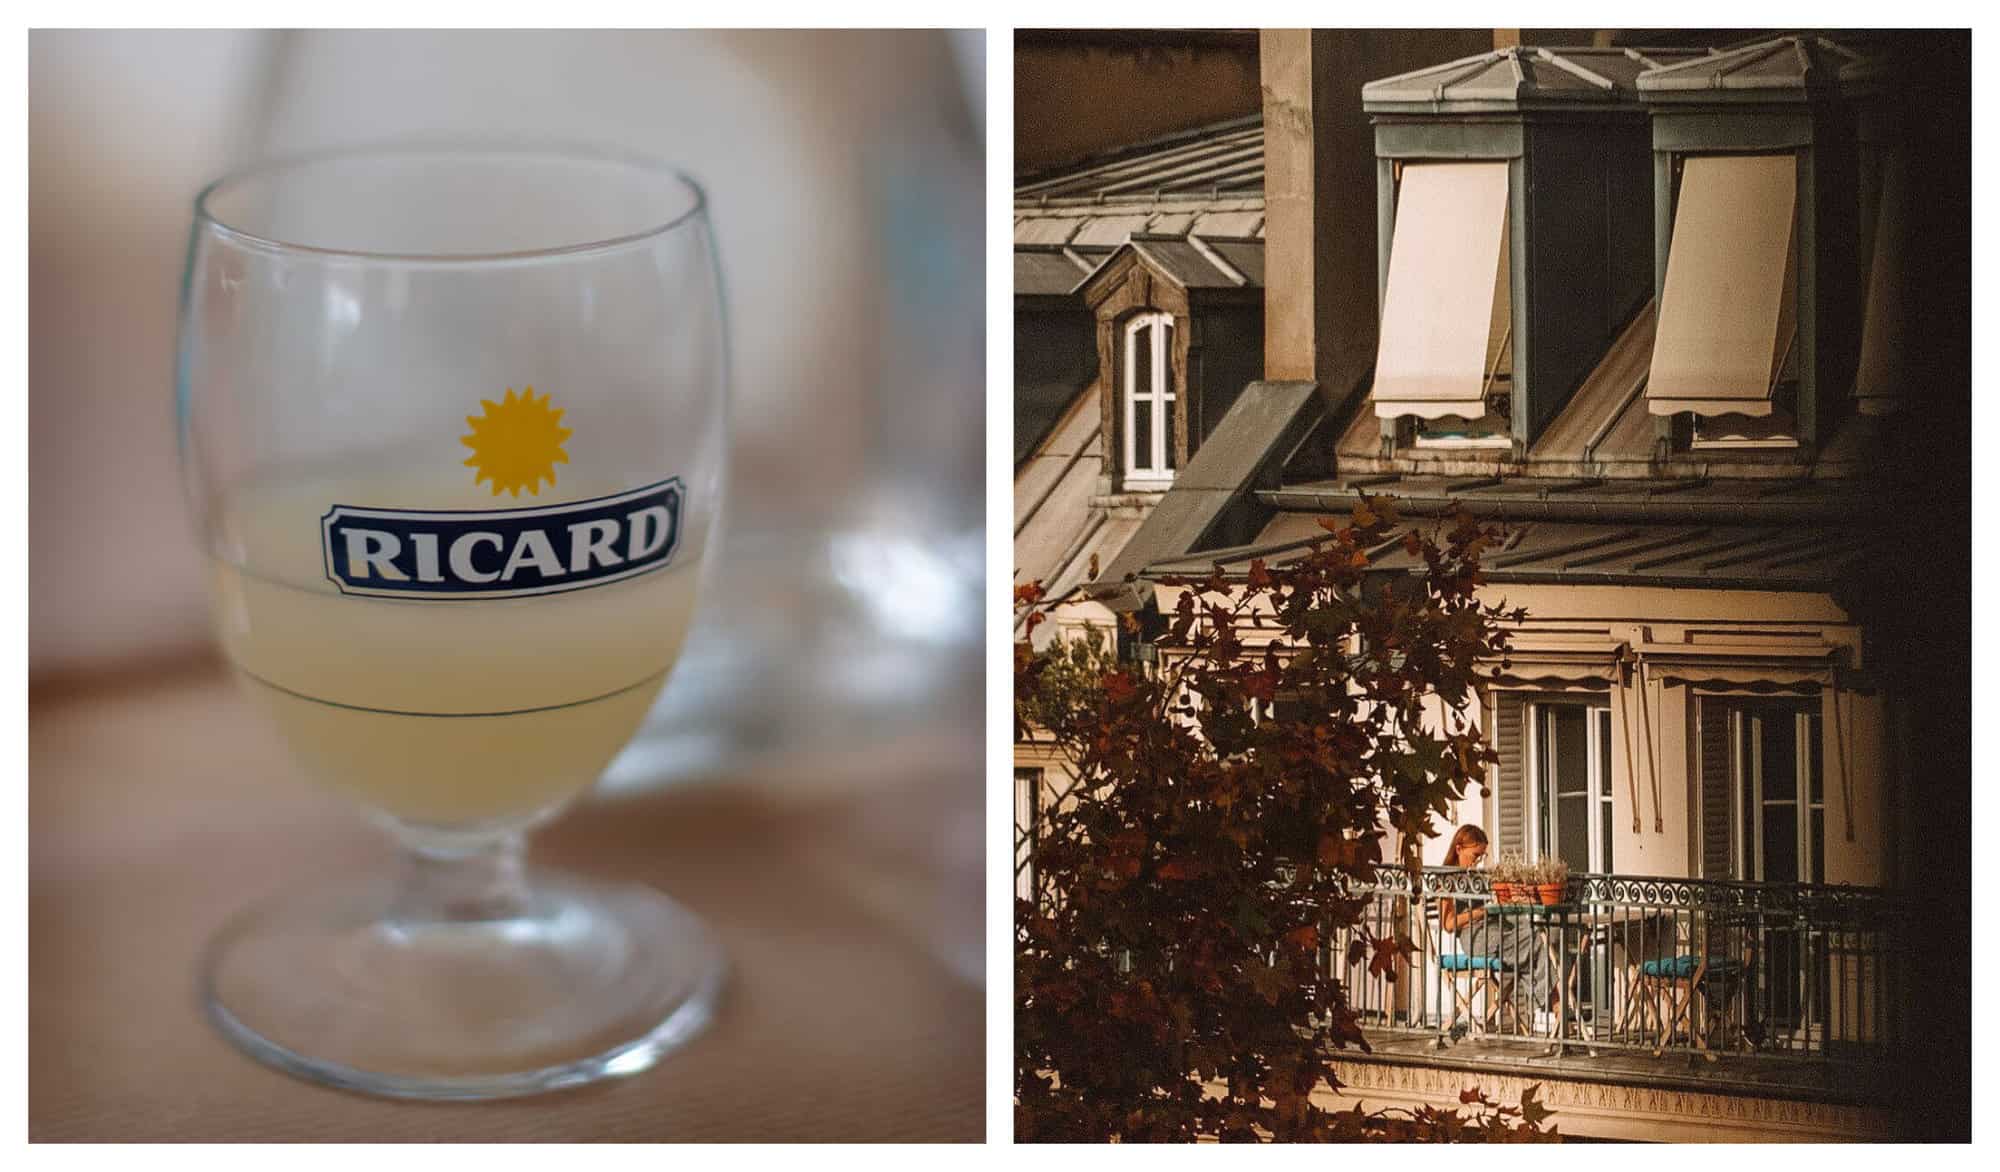 Left: A glass of Ricard half full. Right: A woman enjoys her Parisian balcony just in time for sundown.